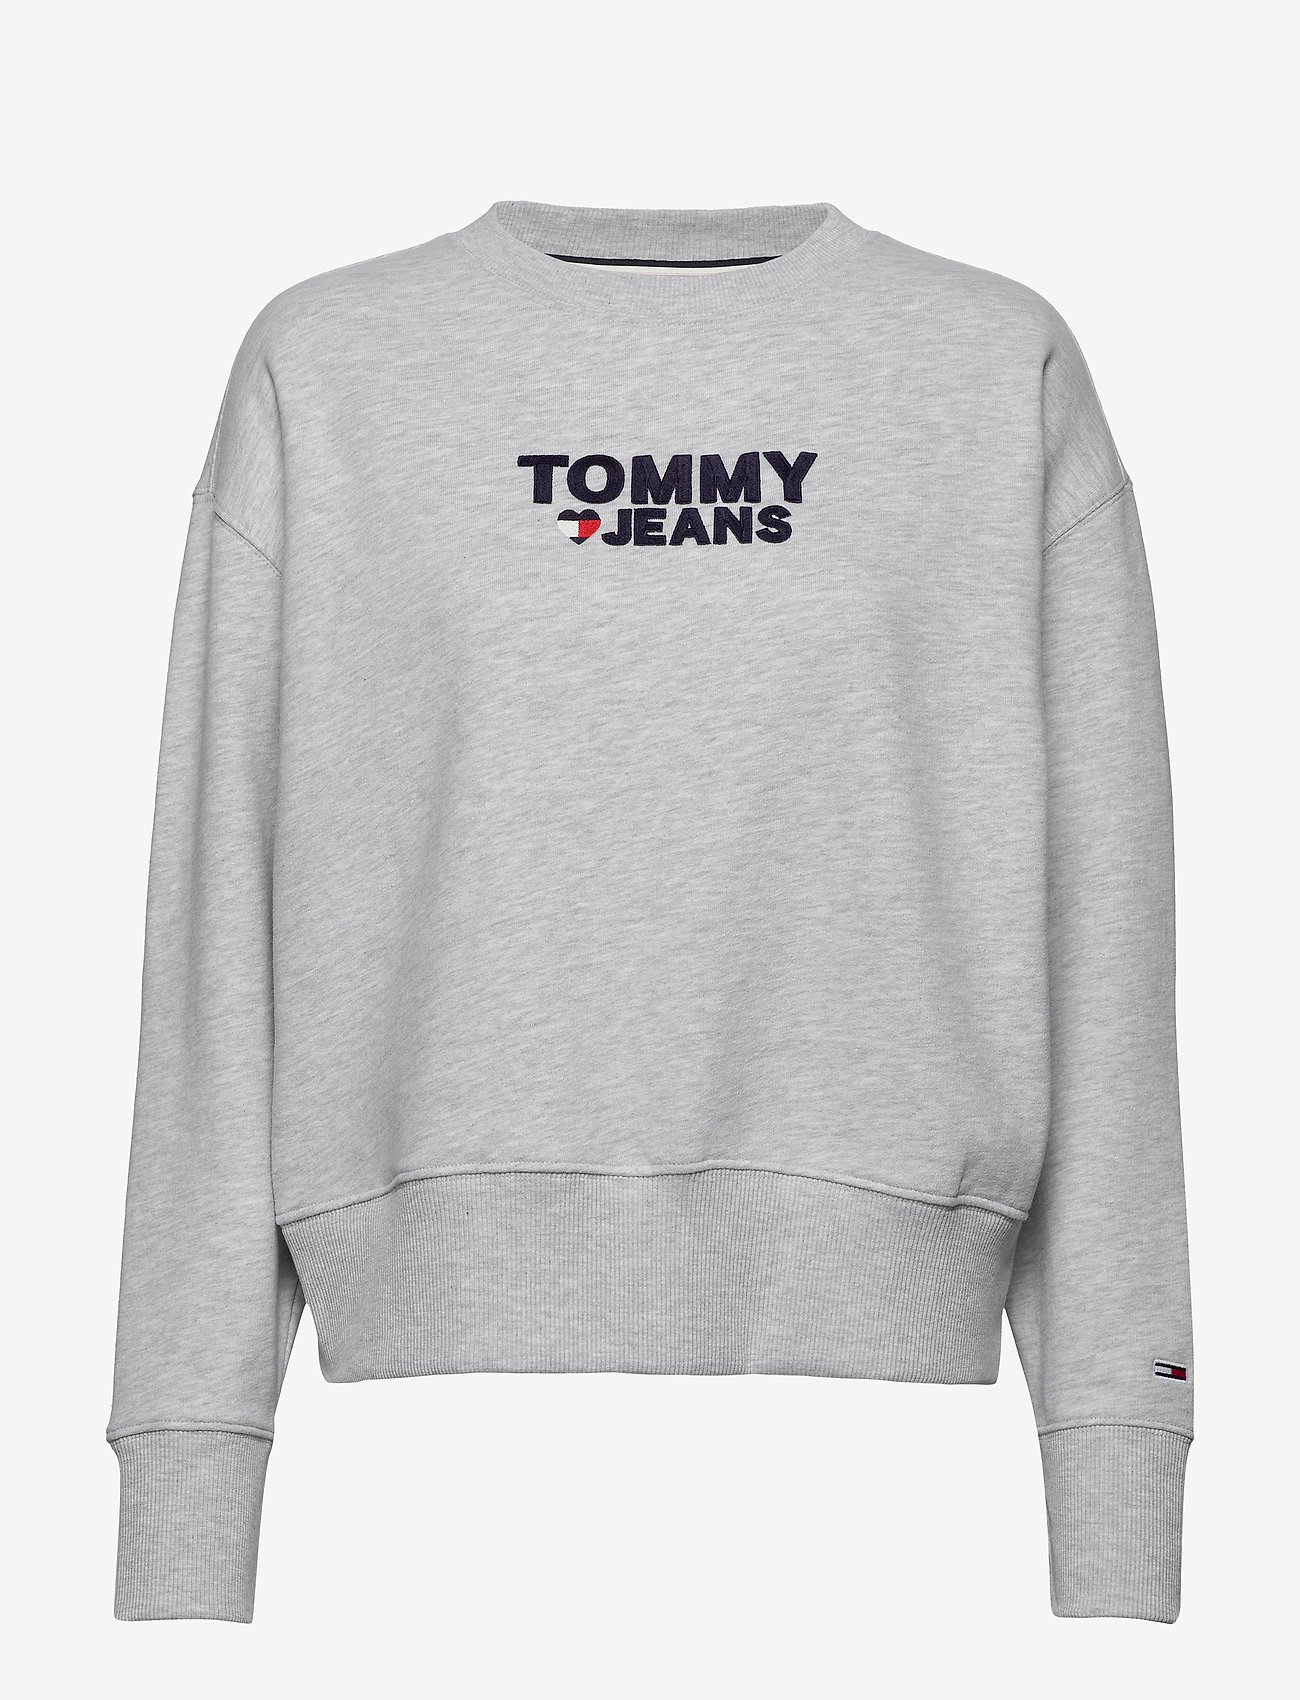 tommy jeans corp logo pullover hoodie